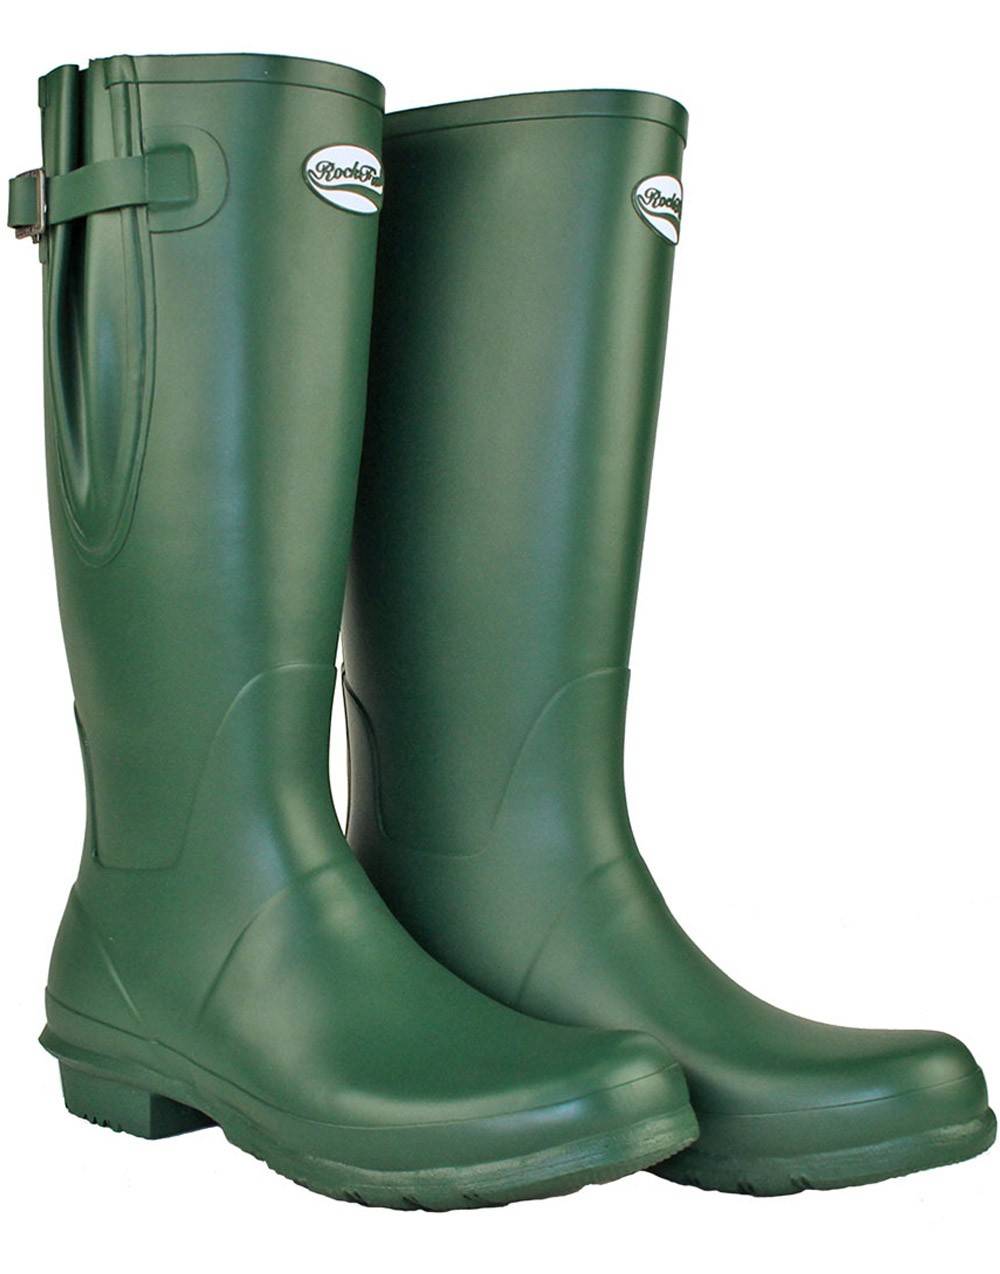 rockfish wellies wide fit